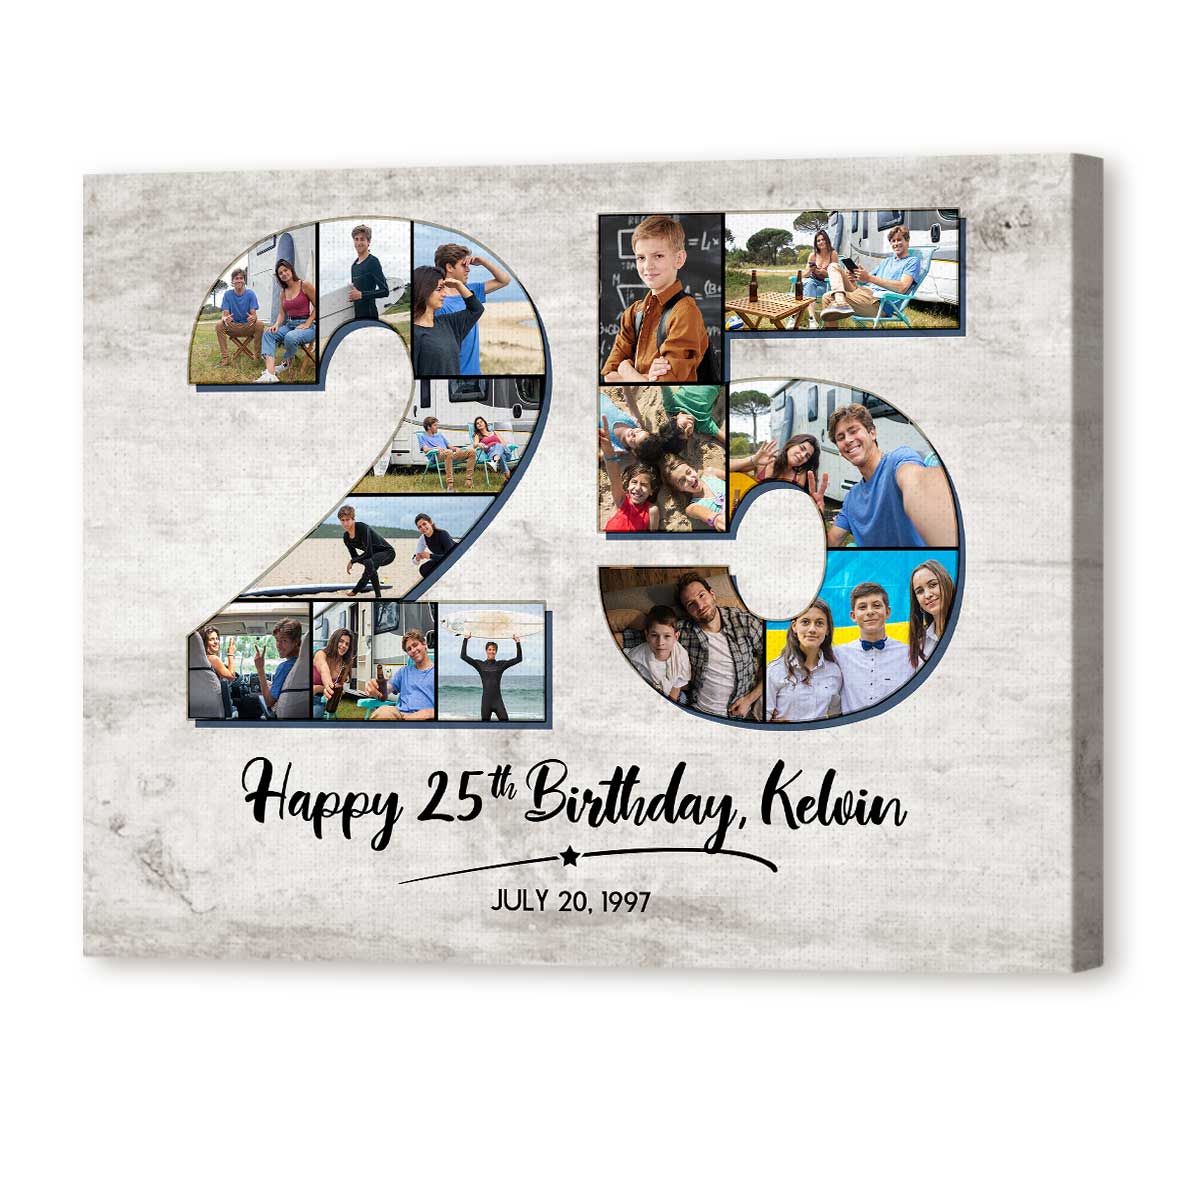 Personalized 25th Birthday Photo Collage Canvas, 25th Birthday Gift Ideas For Him, Number 25 Custom Collage Gift - Best Personalized Gifts For Everyone